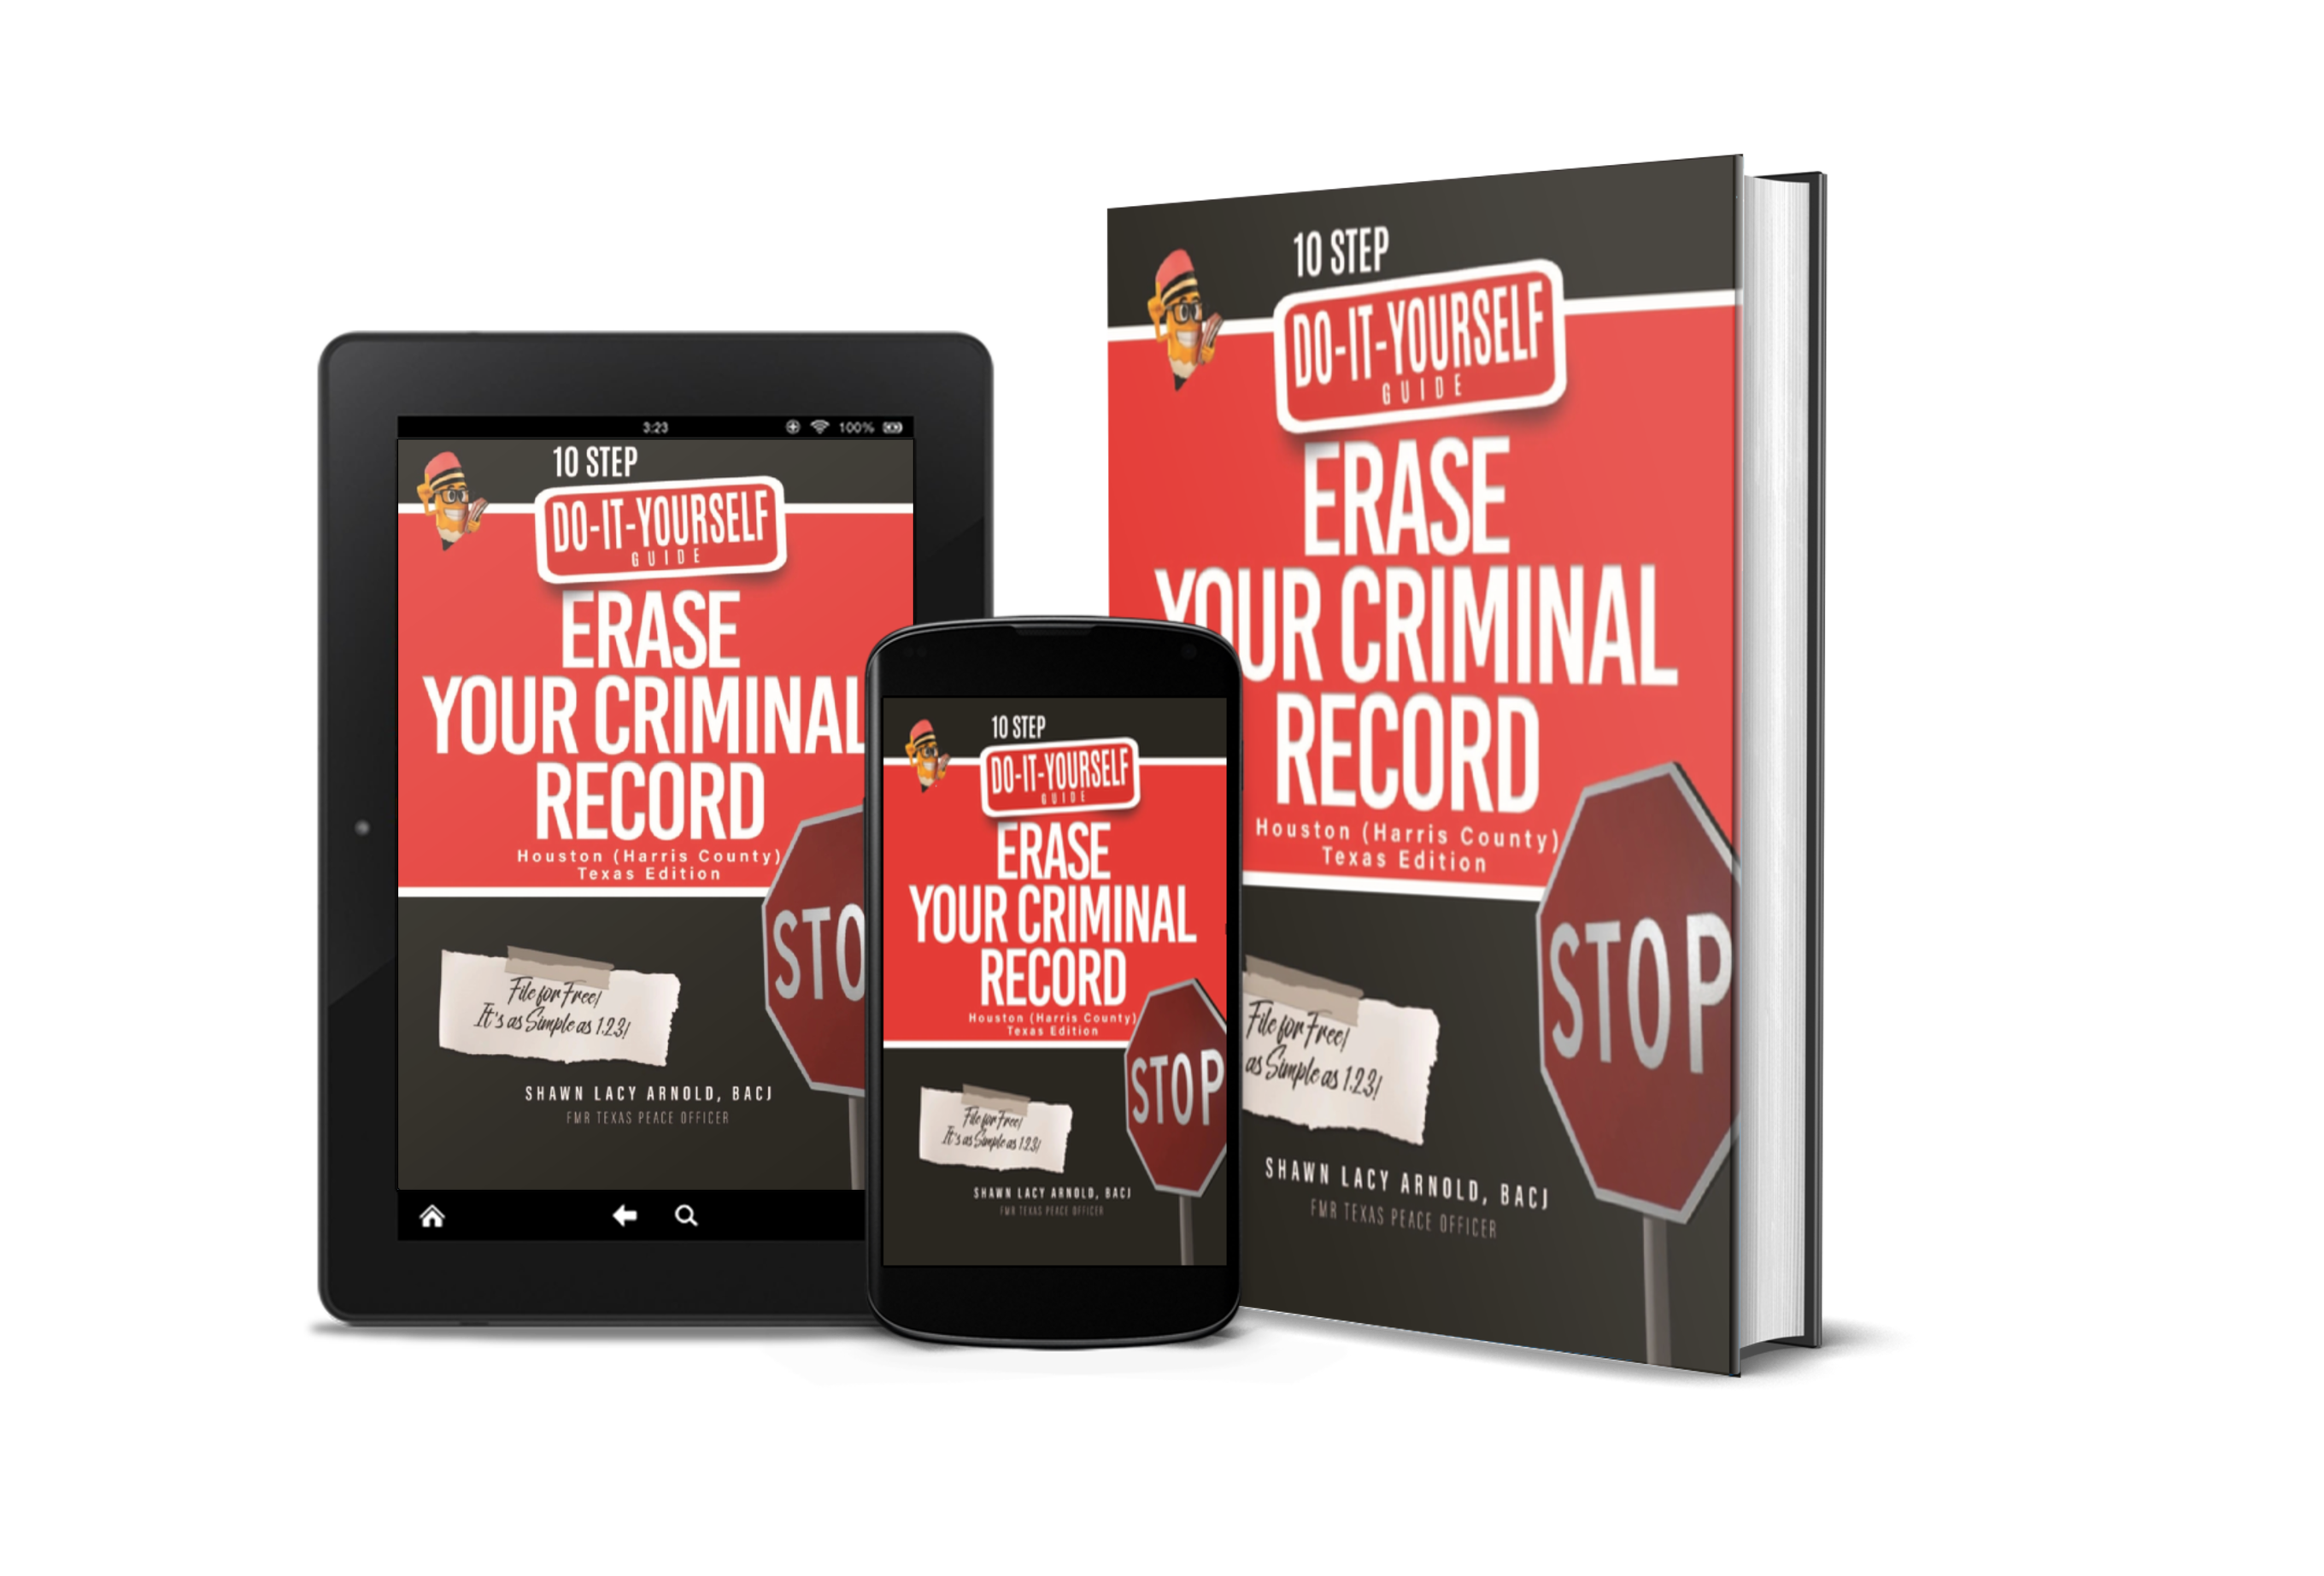 Guide "Erase Your Criminal Record" Helps Community Members With A Fresh Start